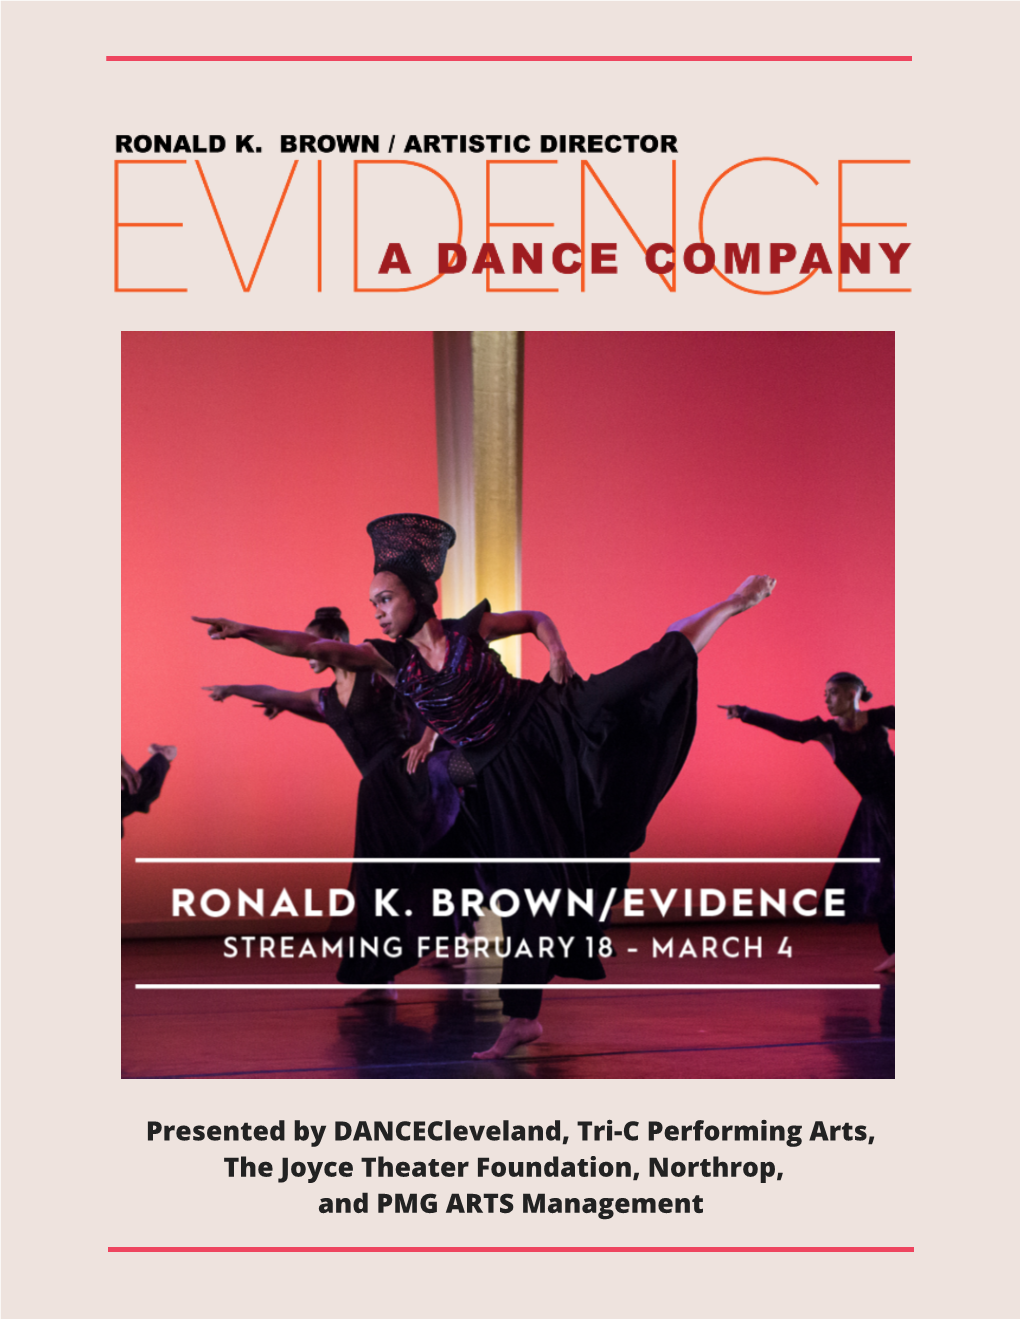 Presented by Dancecleveland, Tri-C Performing Arts, the Joyce Theater Foundation, Northrop, and PMG ARTS Management 1